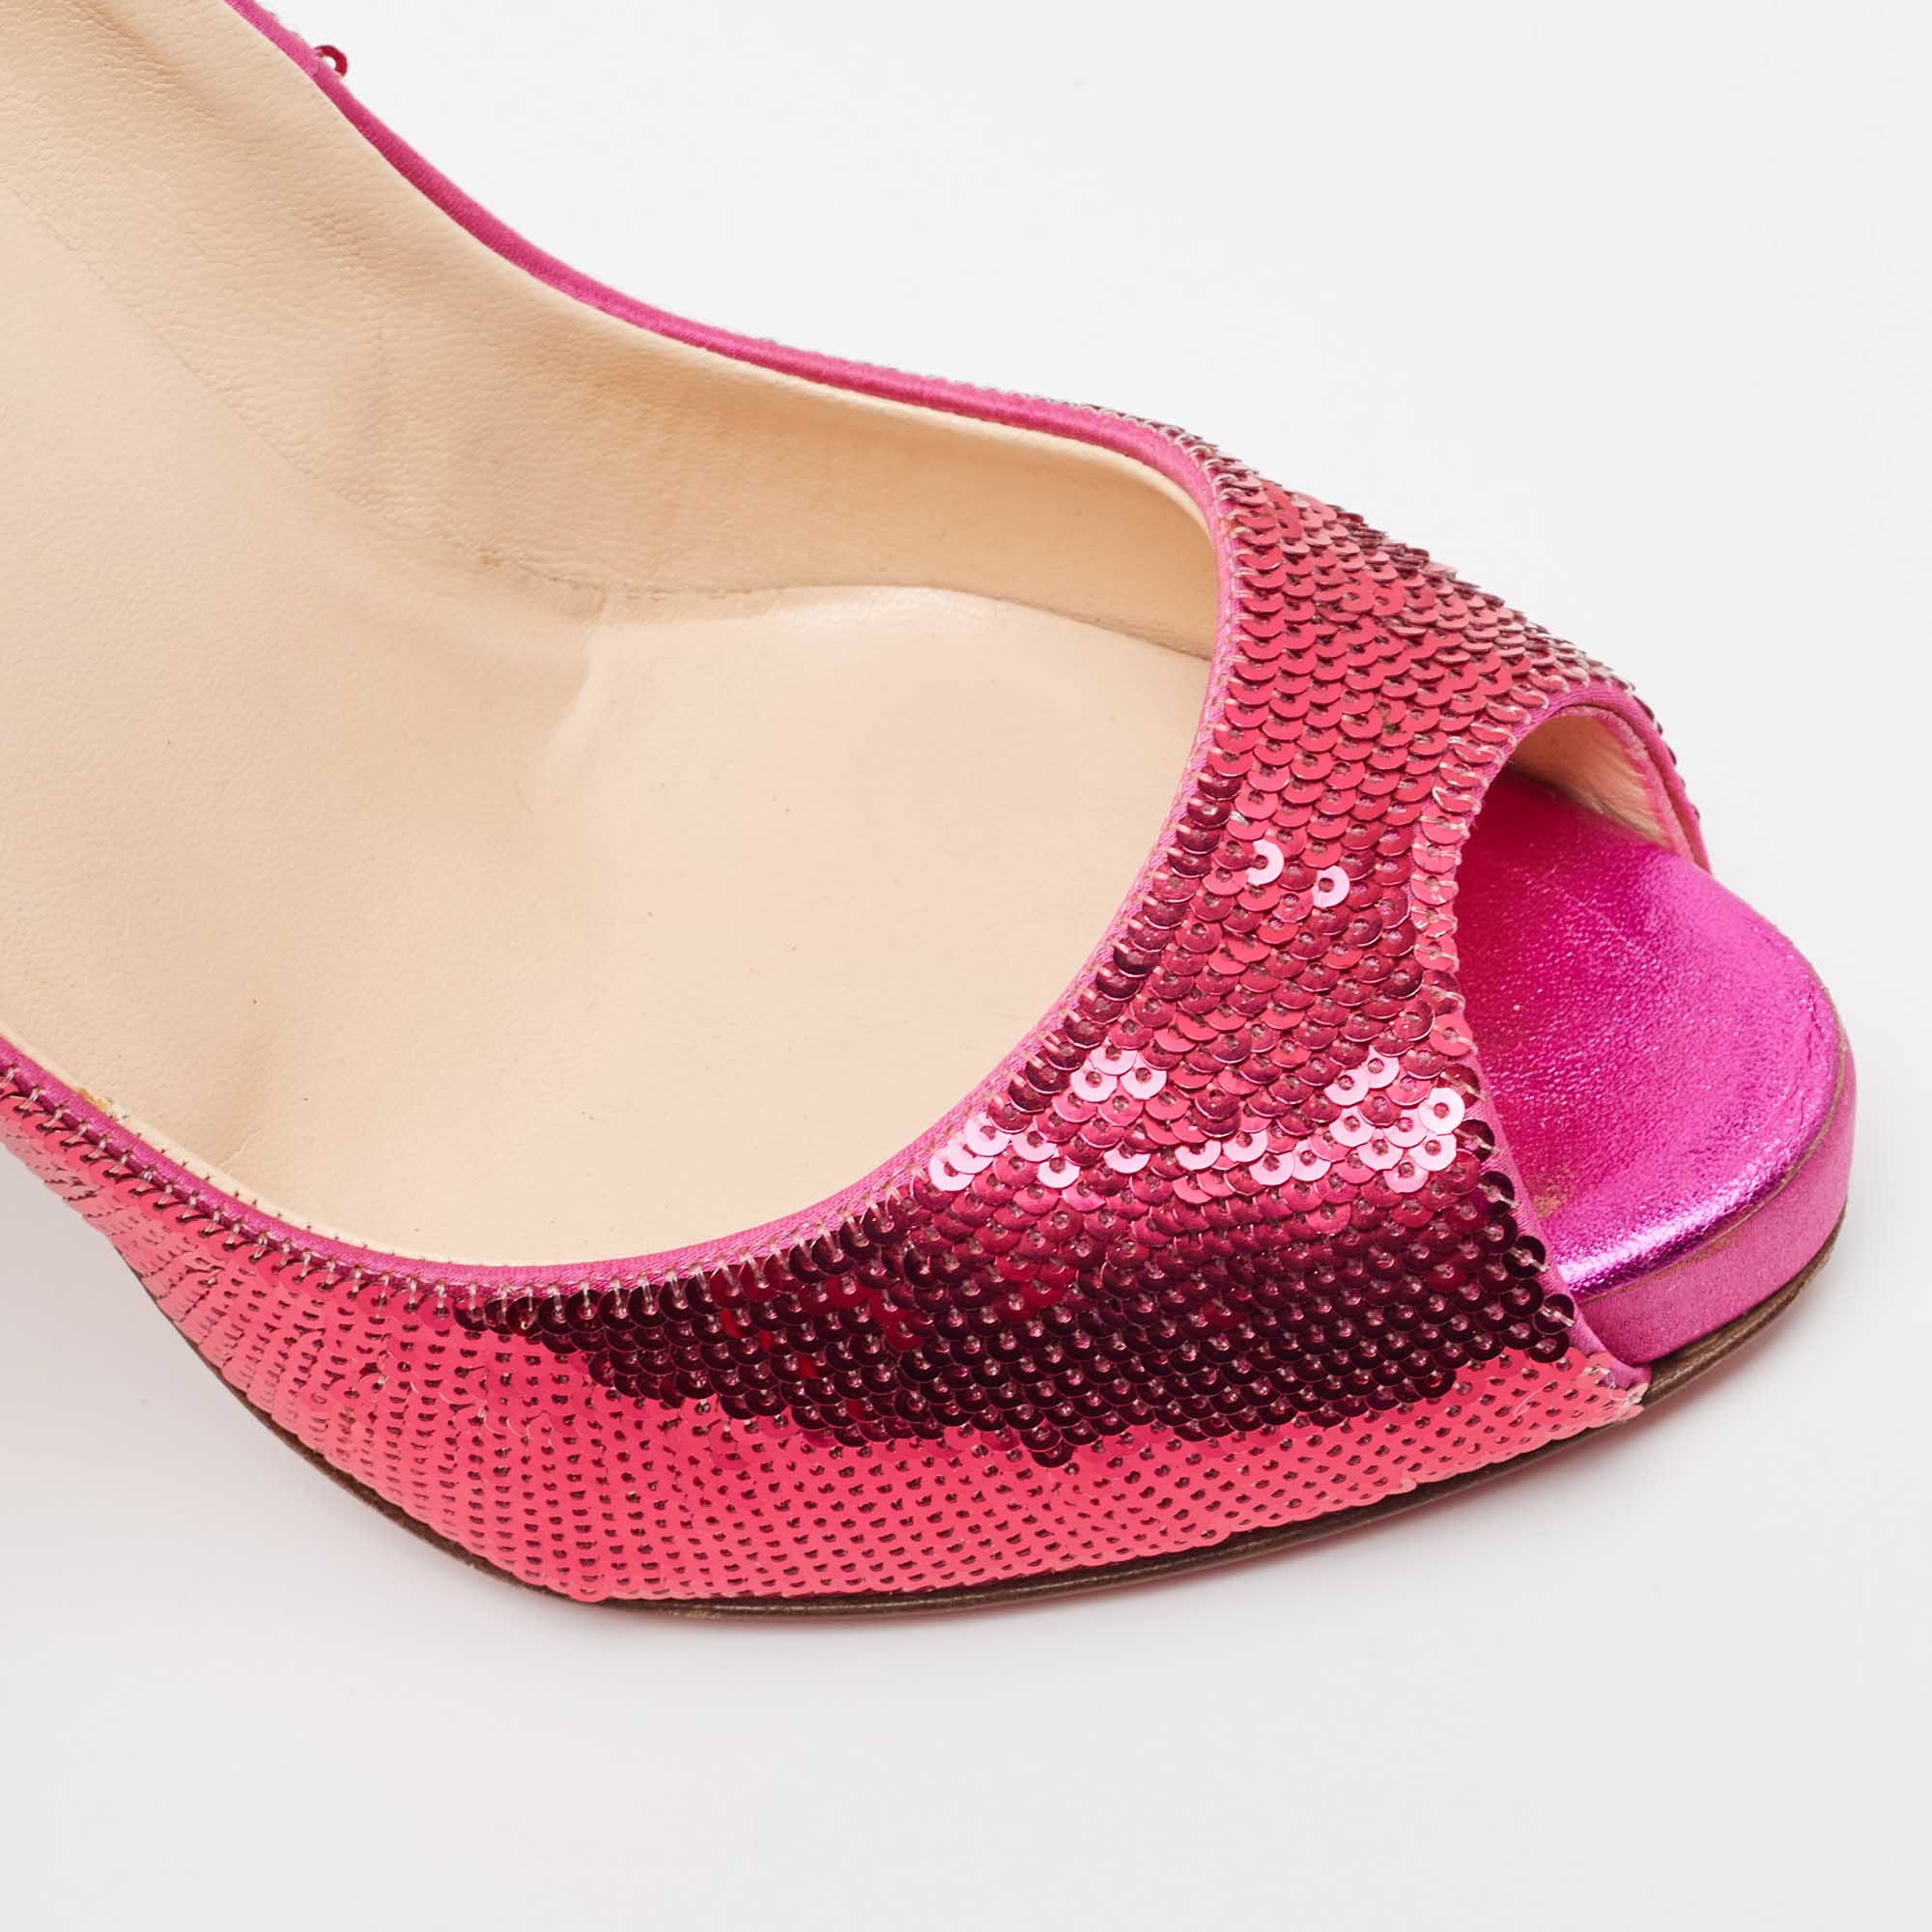 Christian Louboutin Pink Sequin Very Prive Pumps Size 37